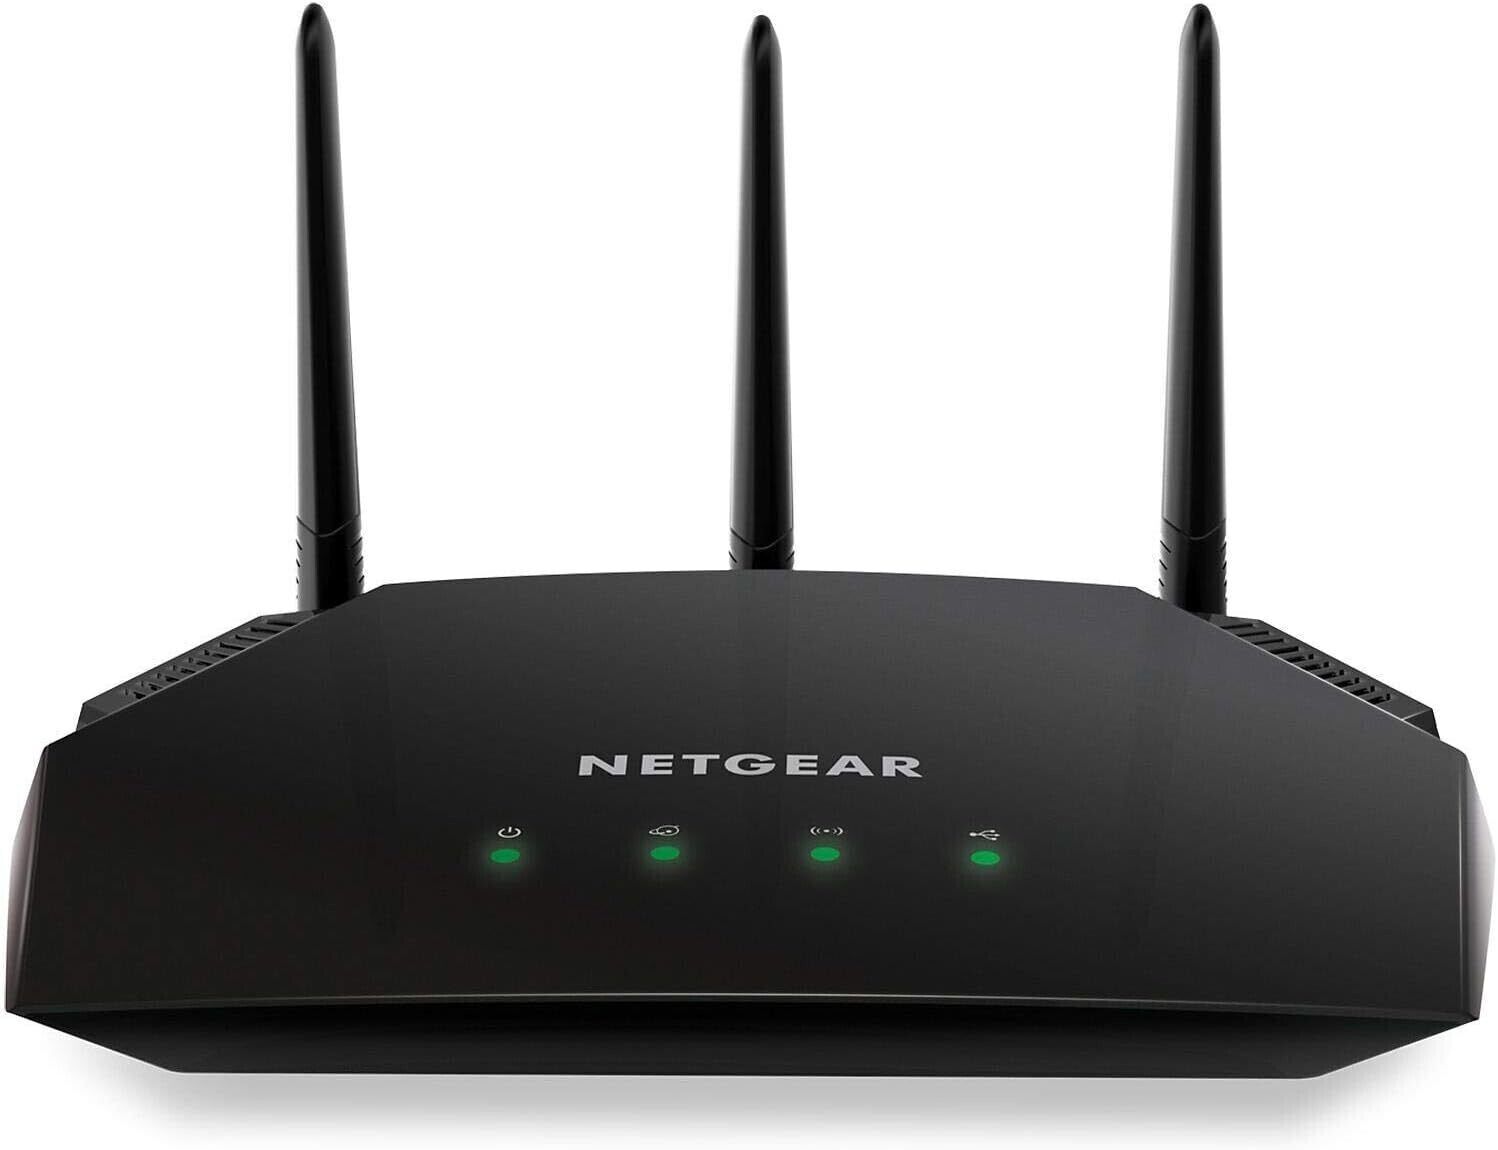 NETGEAR AC2000 Smart WiFi Router Model R6850 - 4 LAN Ports - See Notes